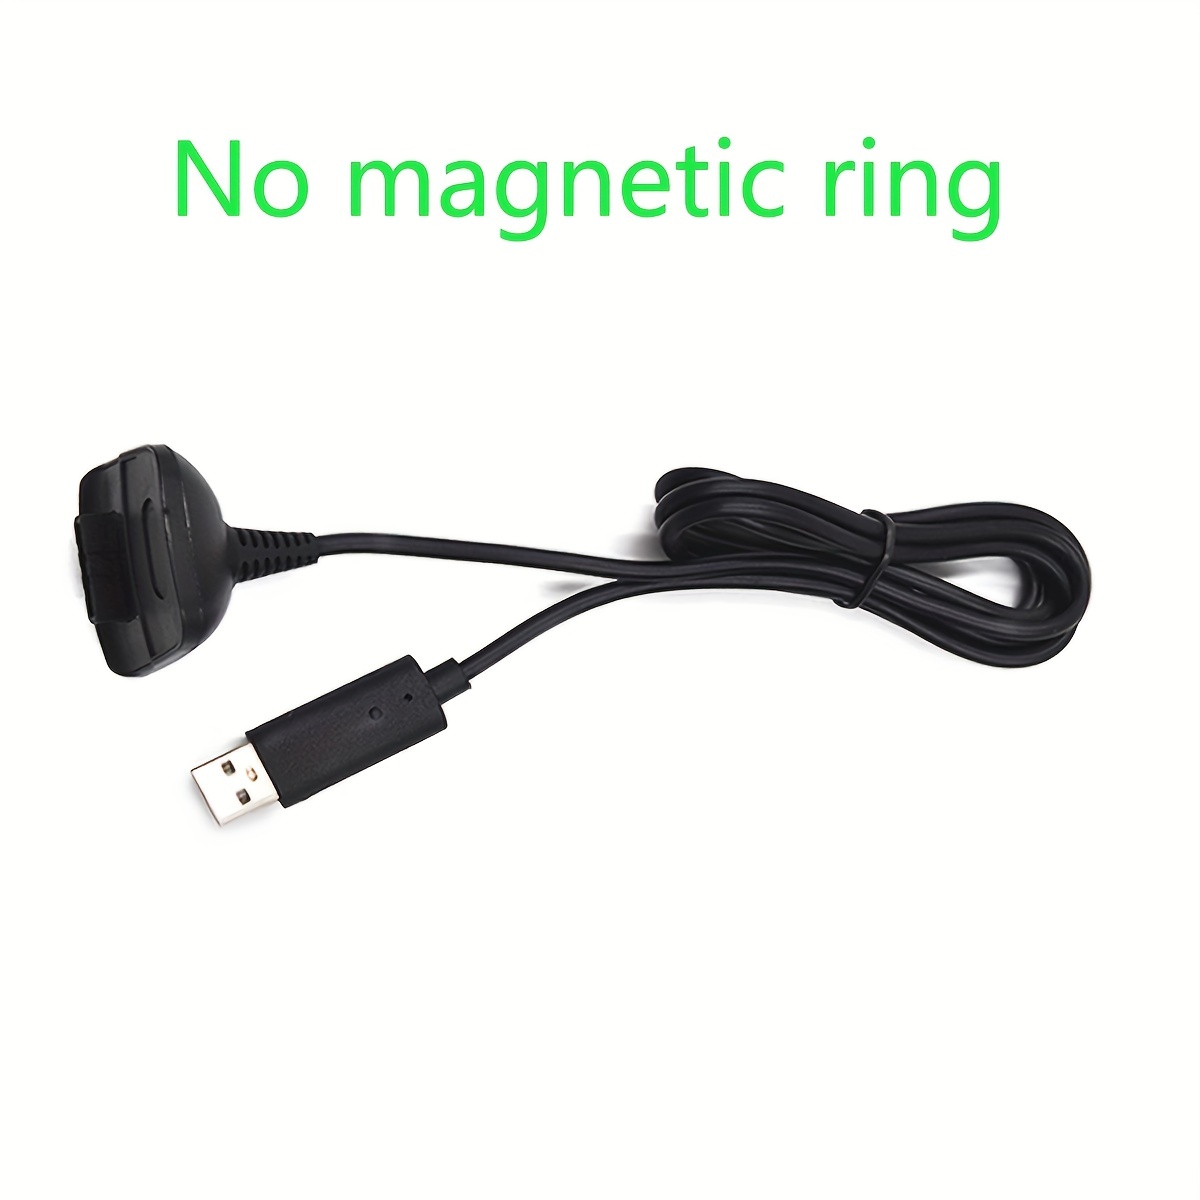 Accessotech USB Charger Lead Cable for Microsoft Xbox 360 Wireless